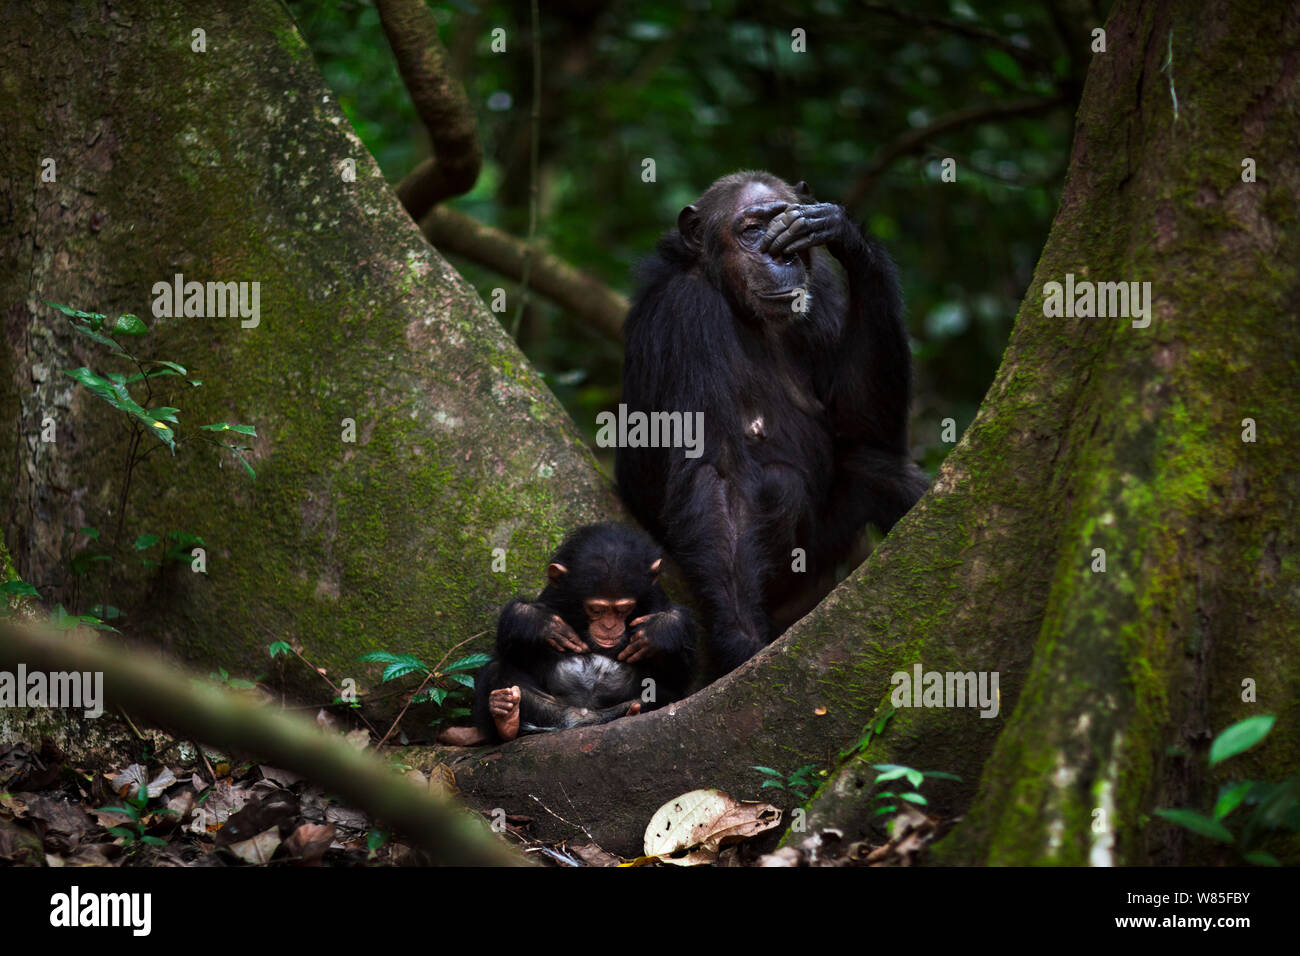 Eastern chimpanzee (Pan troglodytes schweinfurtheii) female &#39;Gremlin&#39; aged 40 years with her infant son &#39;Gizmo&#39; aged 1-2 years sitting between two trees. Gombe National Park, Tanzania. Stock Photo